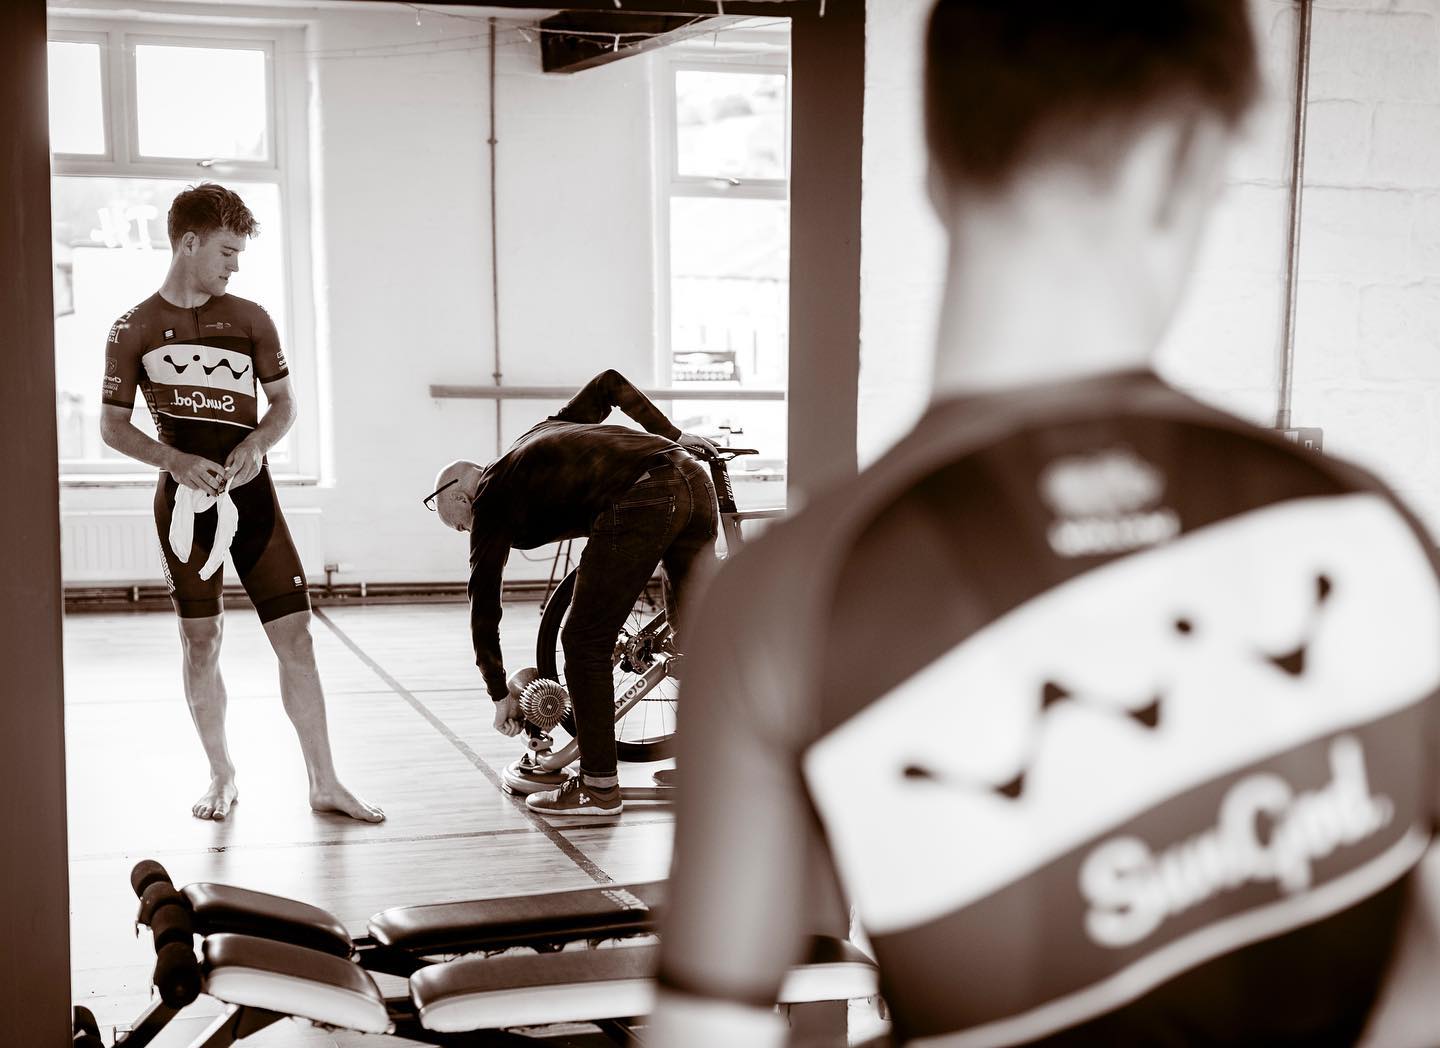 Reflecting on another busy week….
.
We’re now booking for June @htfitness01 in Ripponden and The Foot Company, Holmfirth.
.
Book via link in bio ⬆️
.
📸 @alanbartonphotographer 
.
#bikefit #bikefitting #bikefitter #calderdale #calderfornia #holmfirth #holmevalley #cycling #cyclinglife #cyclinglifestyle #cyclinguk #womenscycling #yorkshirecycling